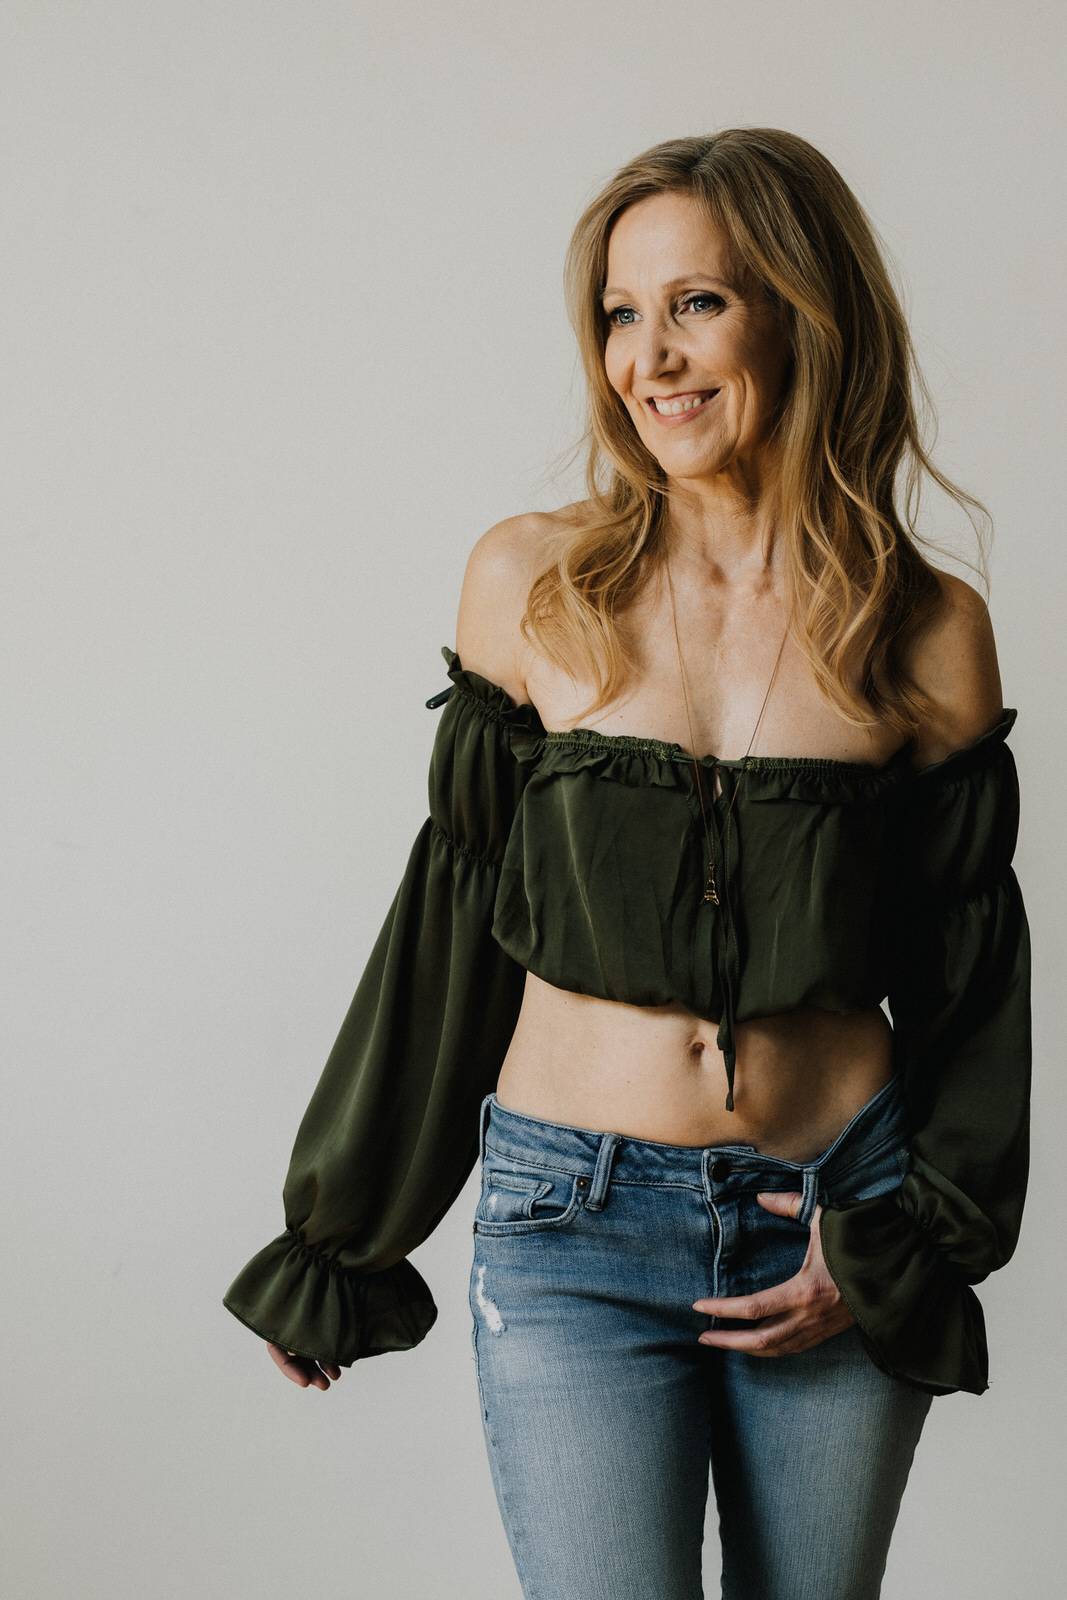 vancouver classy boudoir image of woman in jeans and revealing top